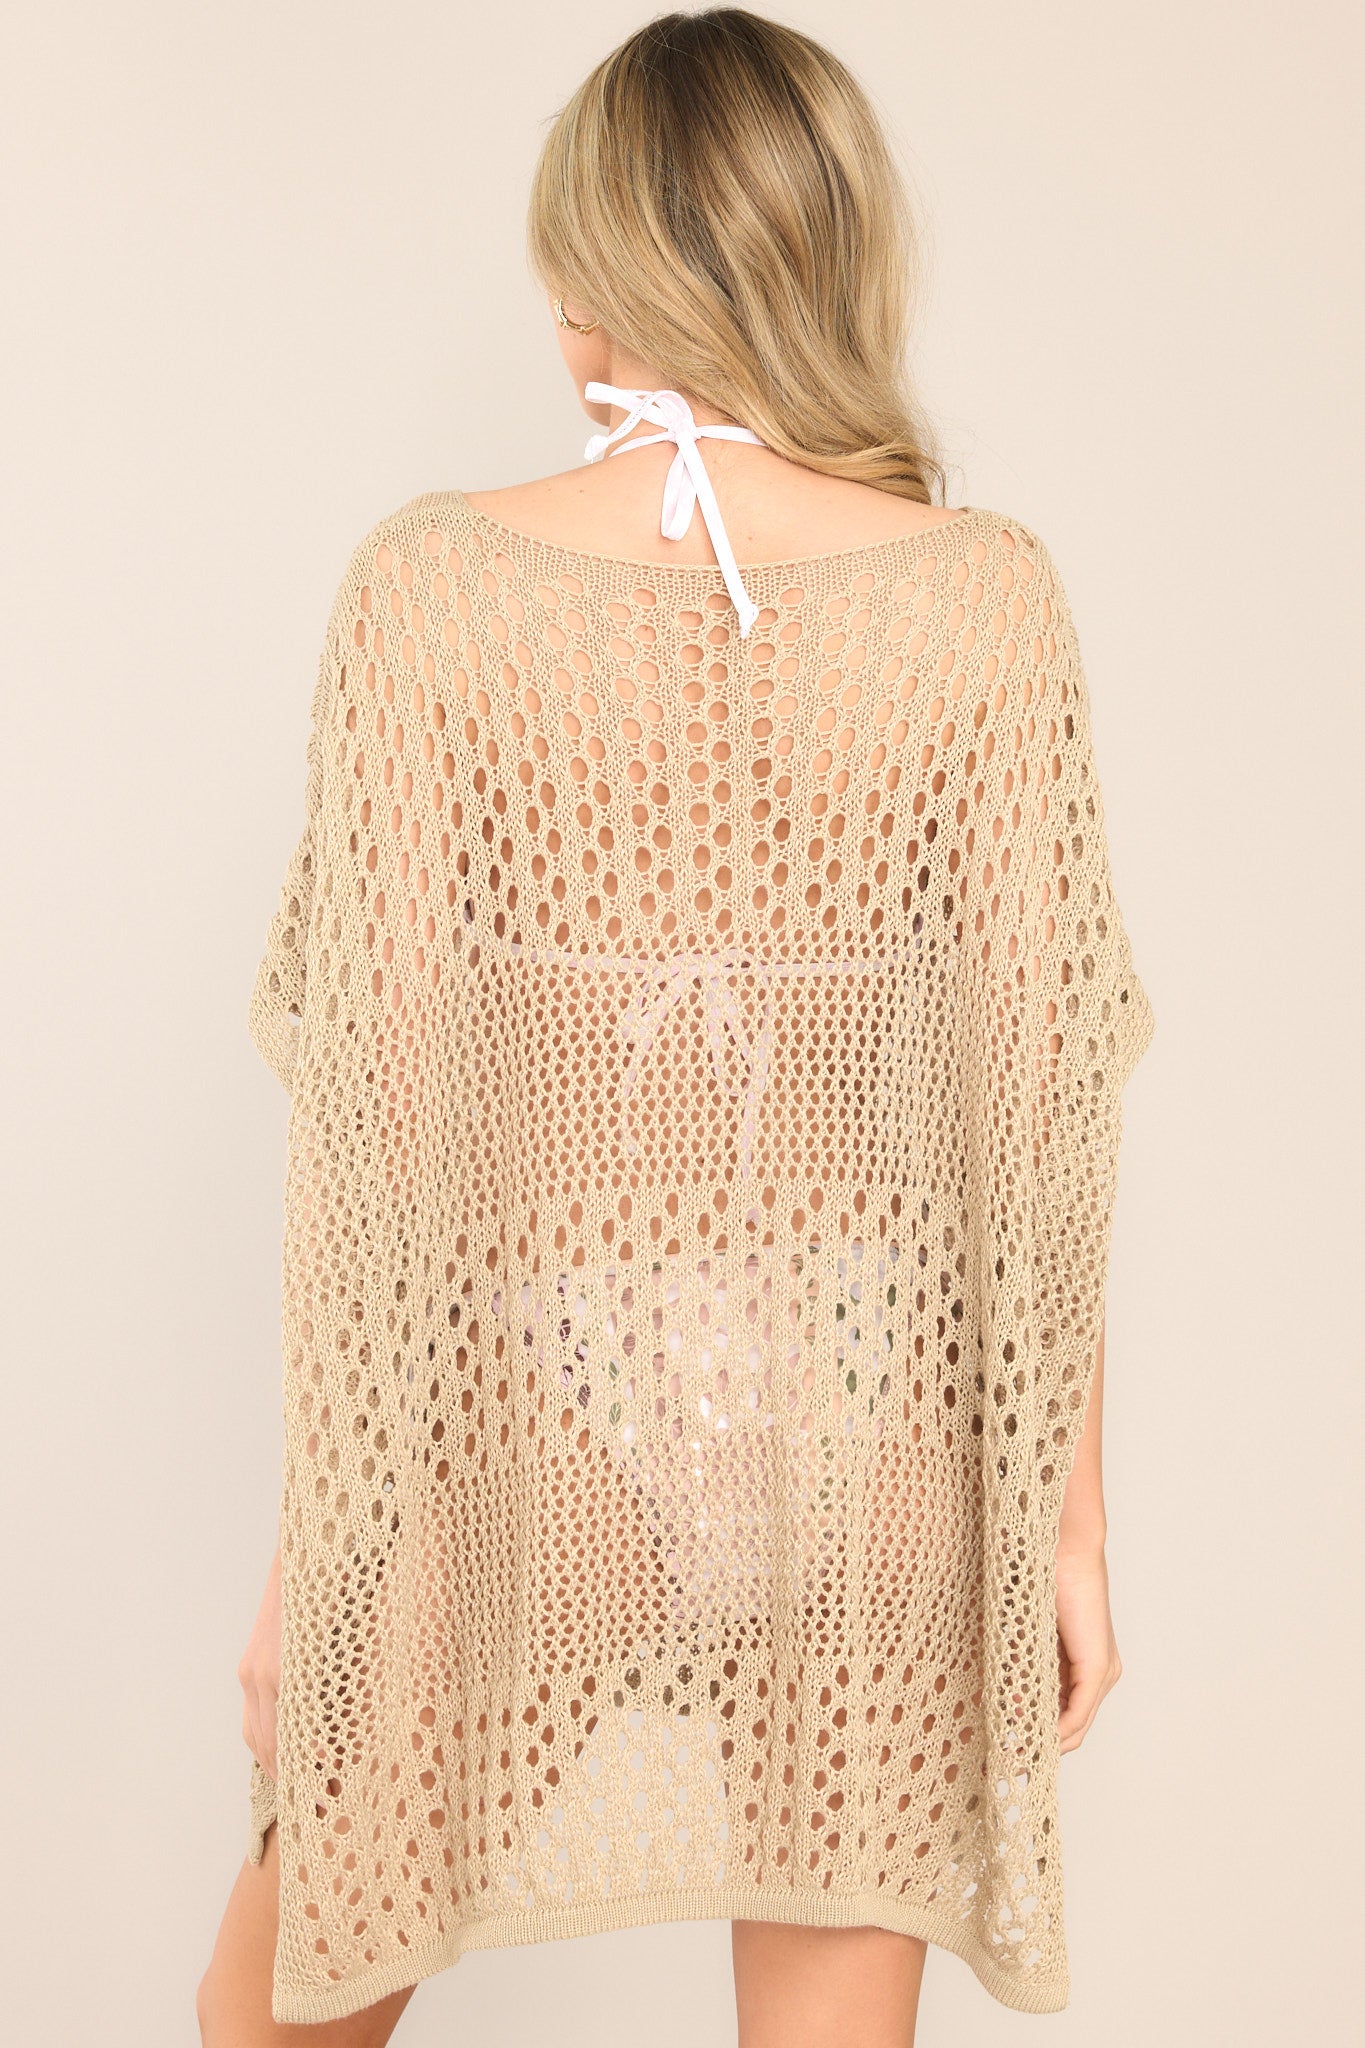 Back view of this cover up that features a v-neckline, dropped shoulders, a chunky knit material, and cuffed sleeves.